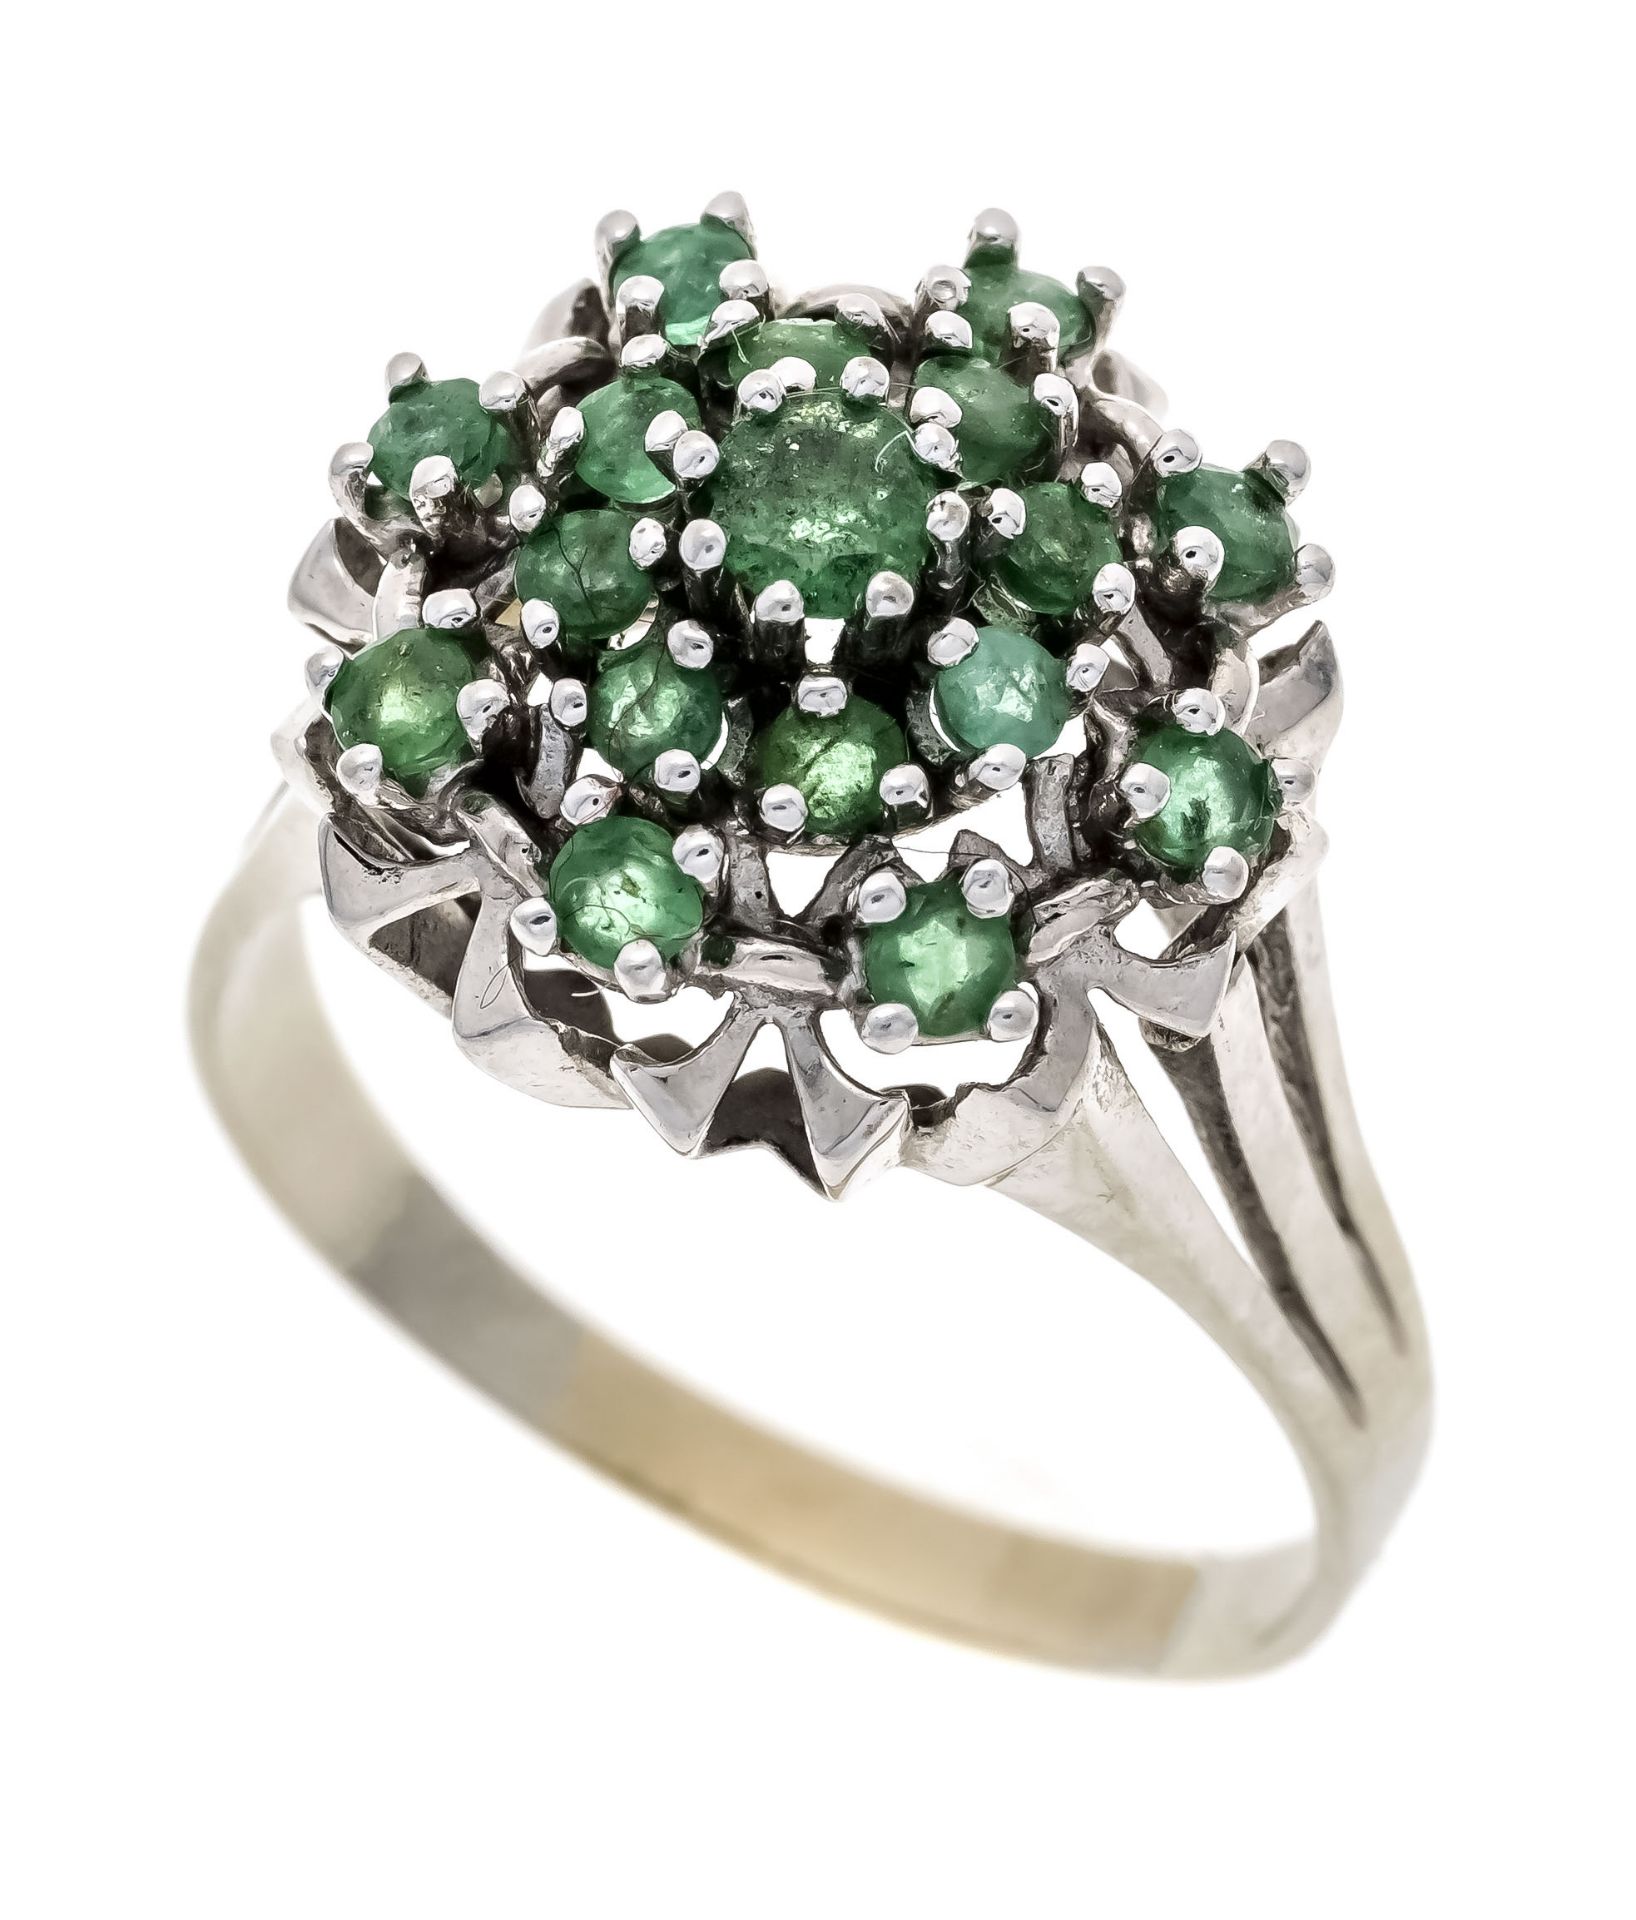 Emerald ring WG 585/000 with 17 round faceted emeralds 3.3 - 2.2 mm green, translucent - opaque,